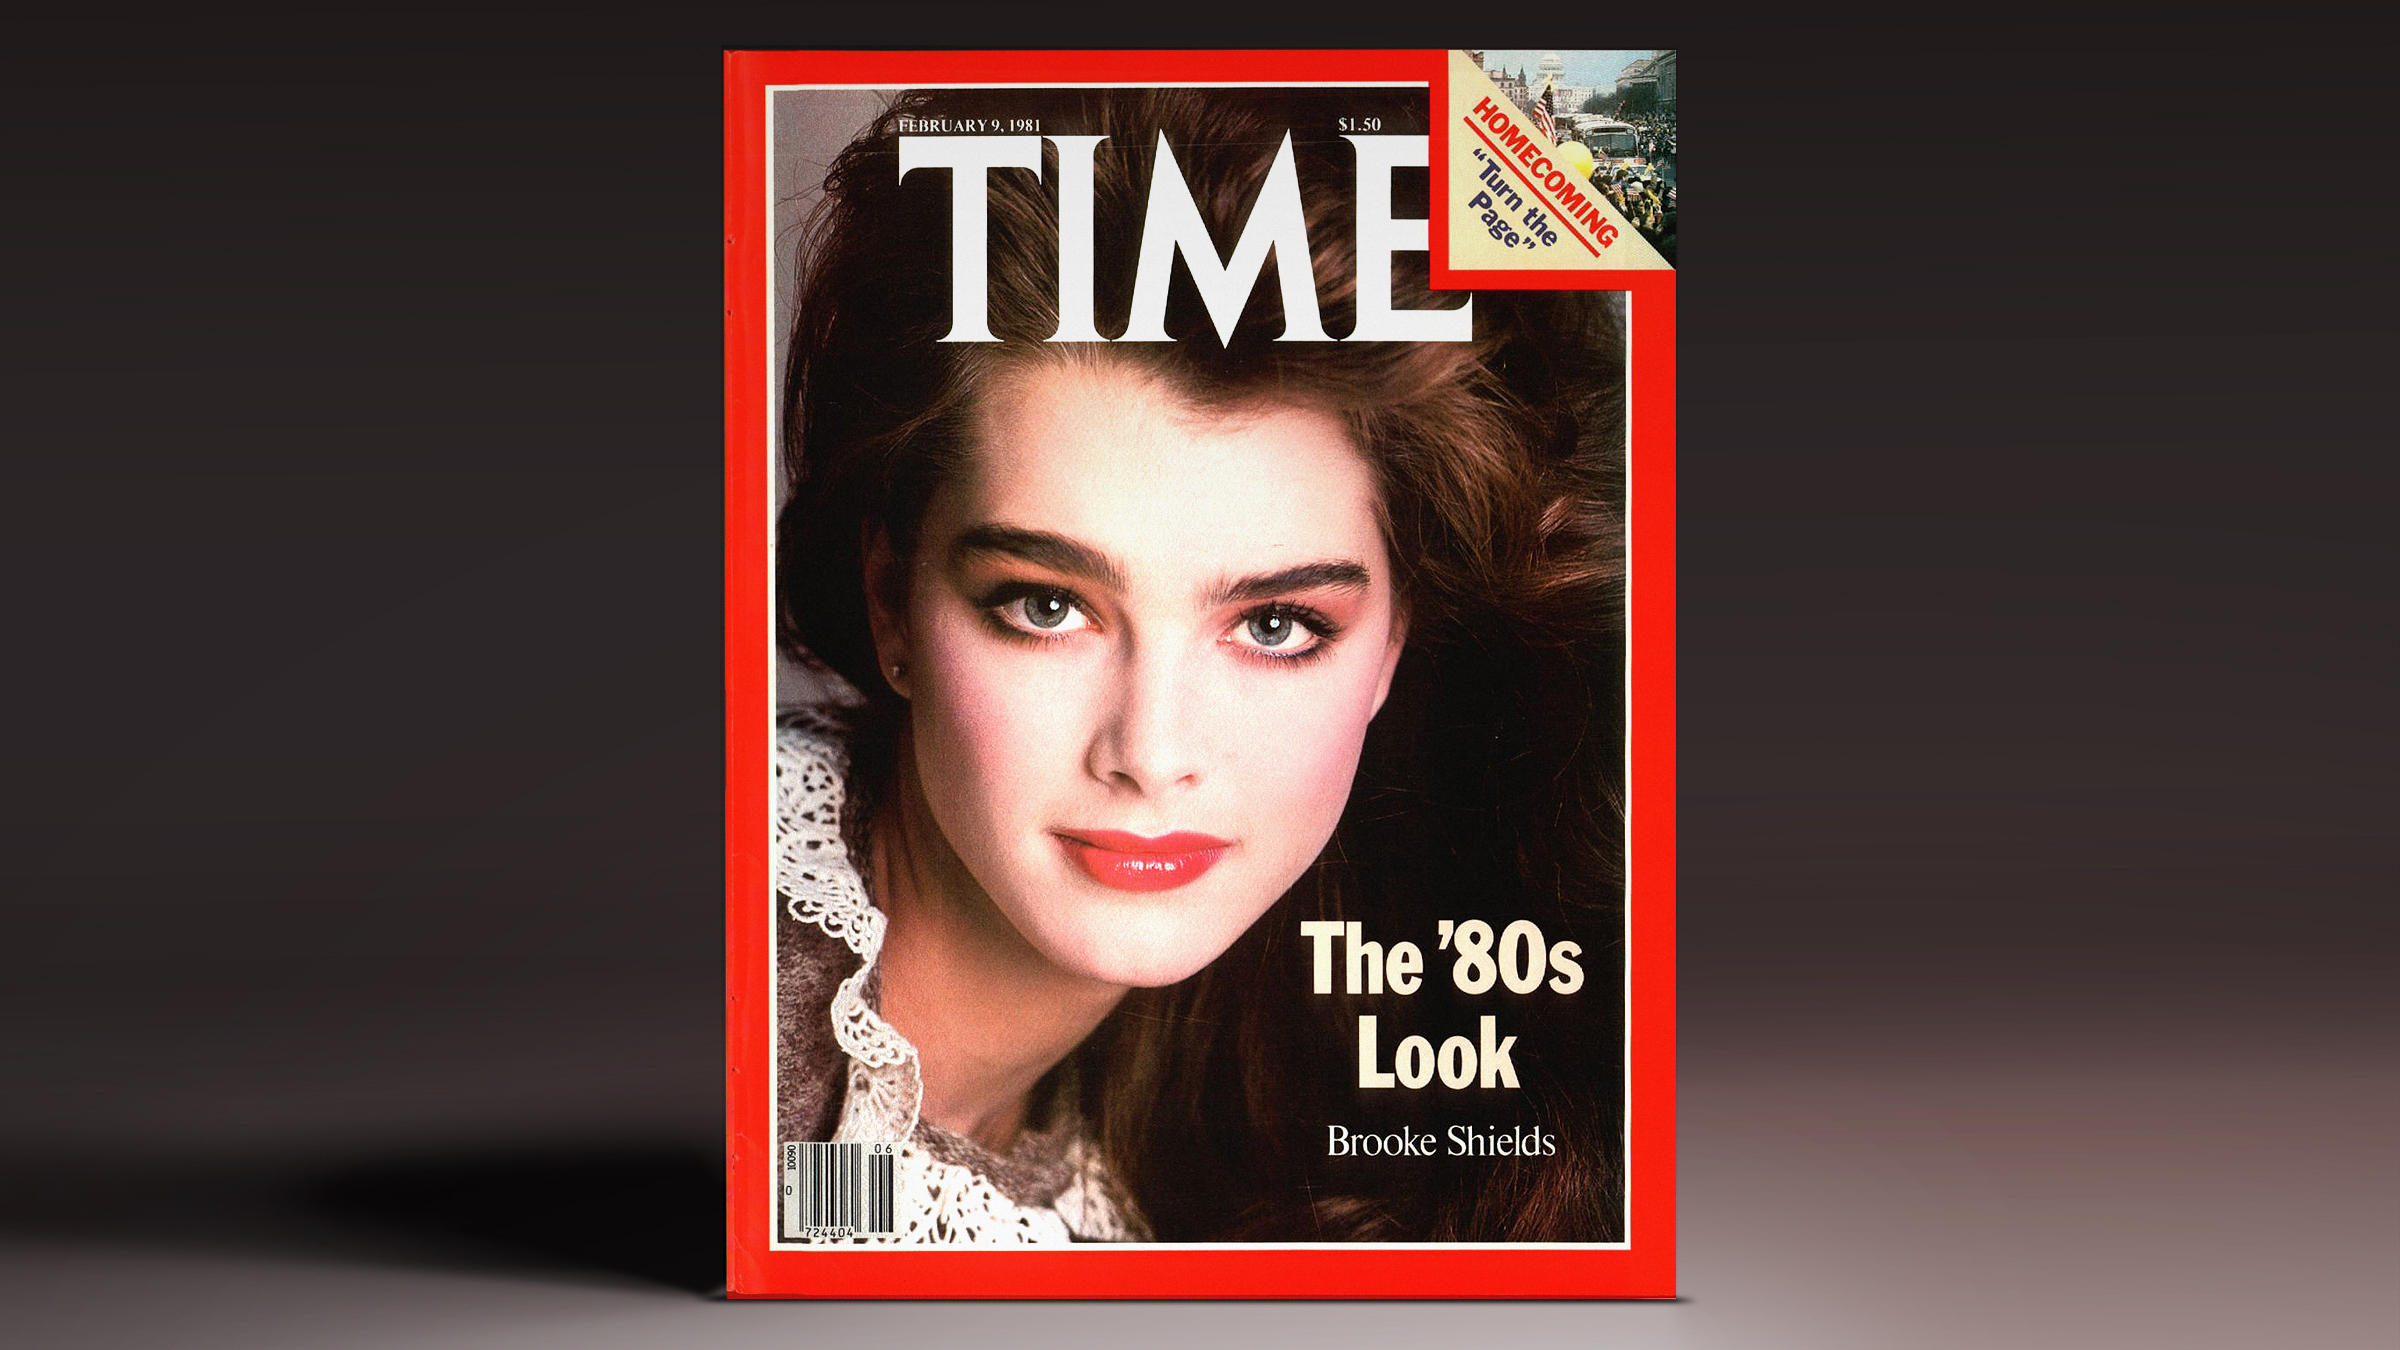 Brooke Shields on the Feb. 9, 1981, cover of TIME (Cover Credit: FRANCESCO SCAVULLO)